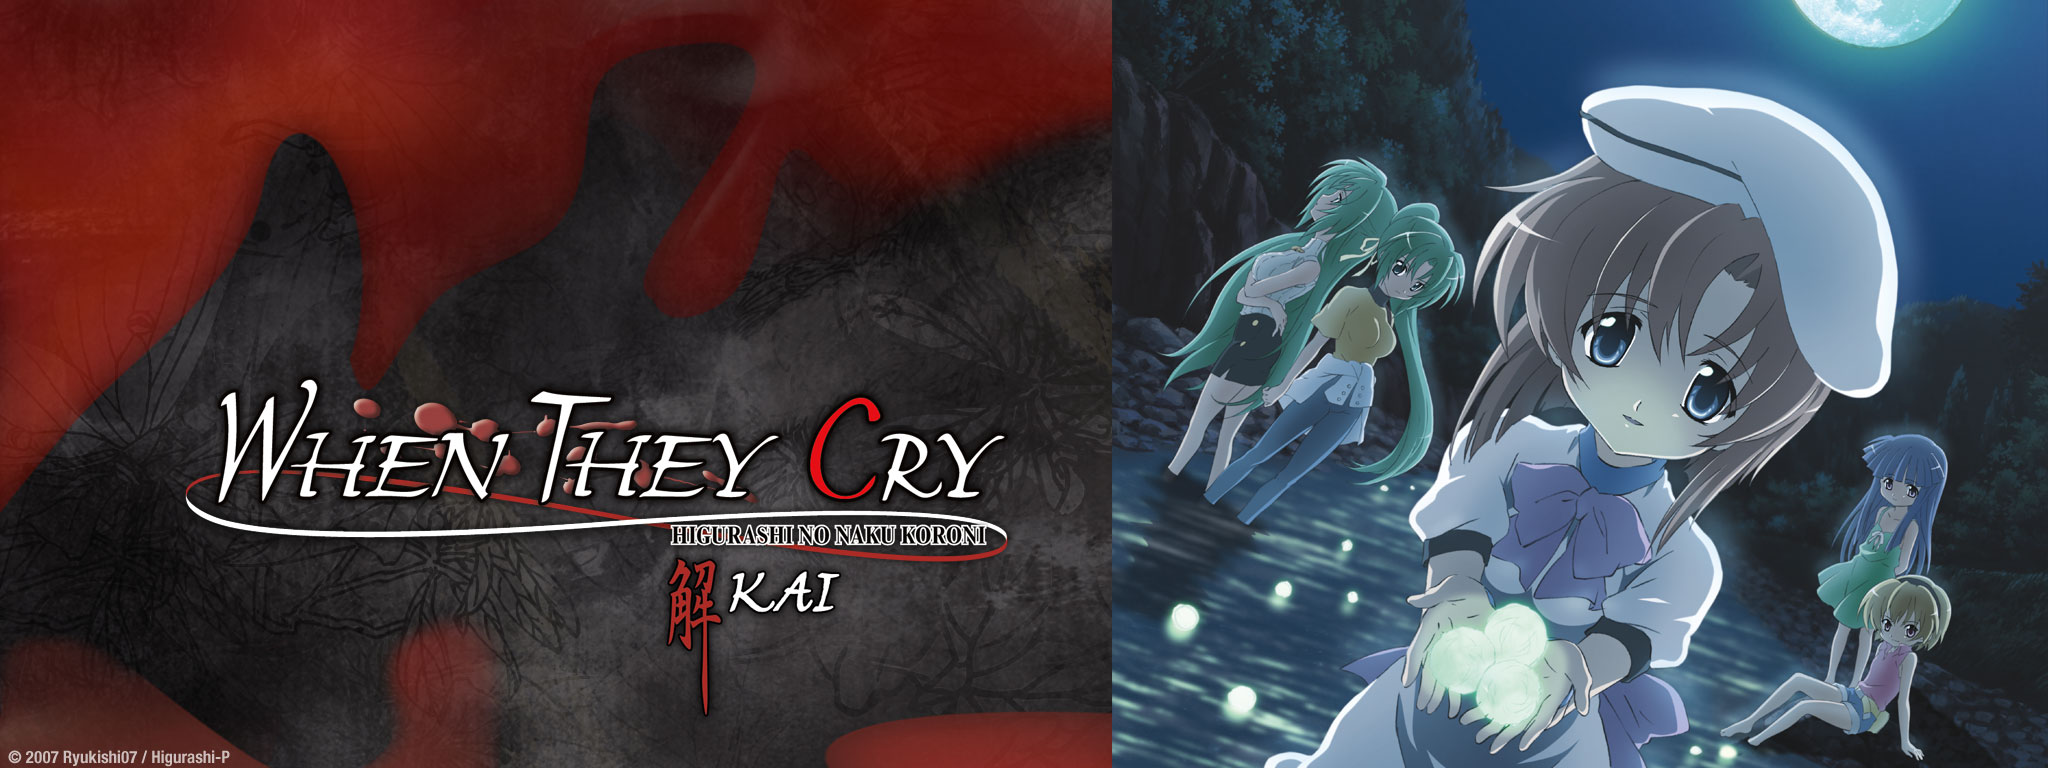 Title Art for When They Cry Kai